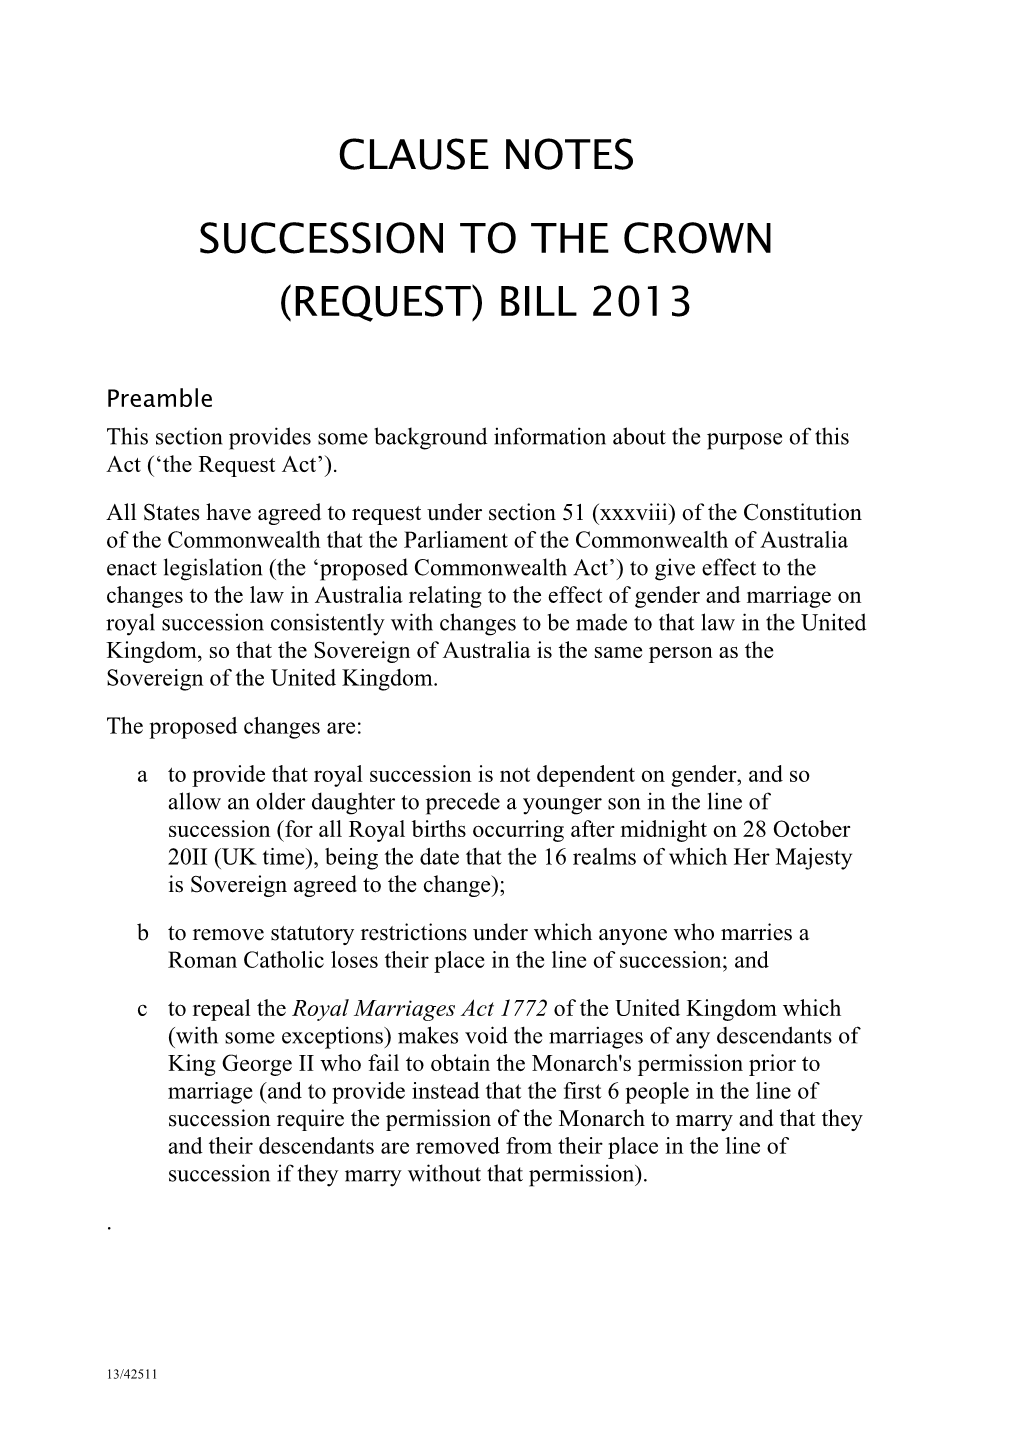 Clause Notes Succession to the Crown (Request) Bill 2013